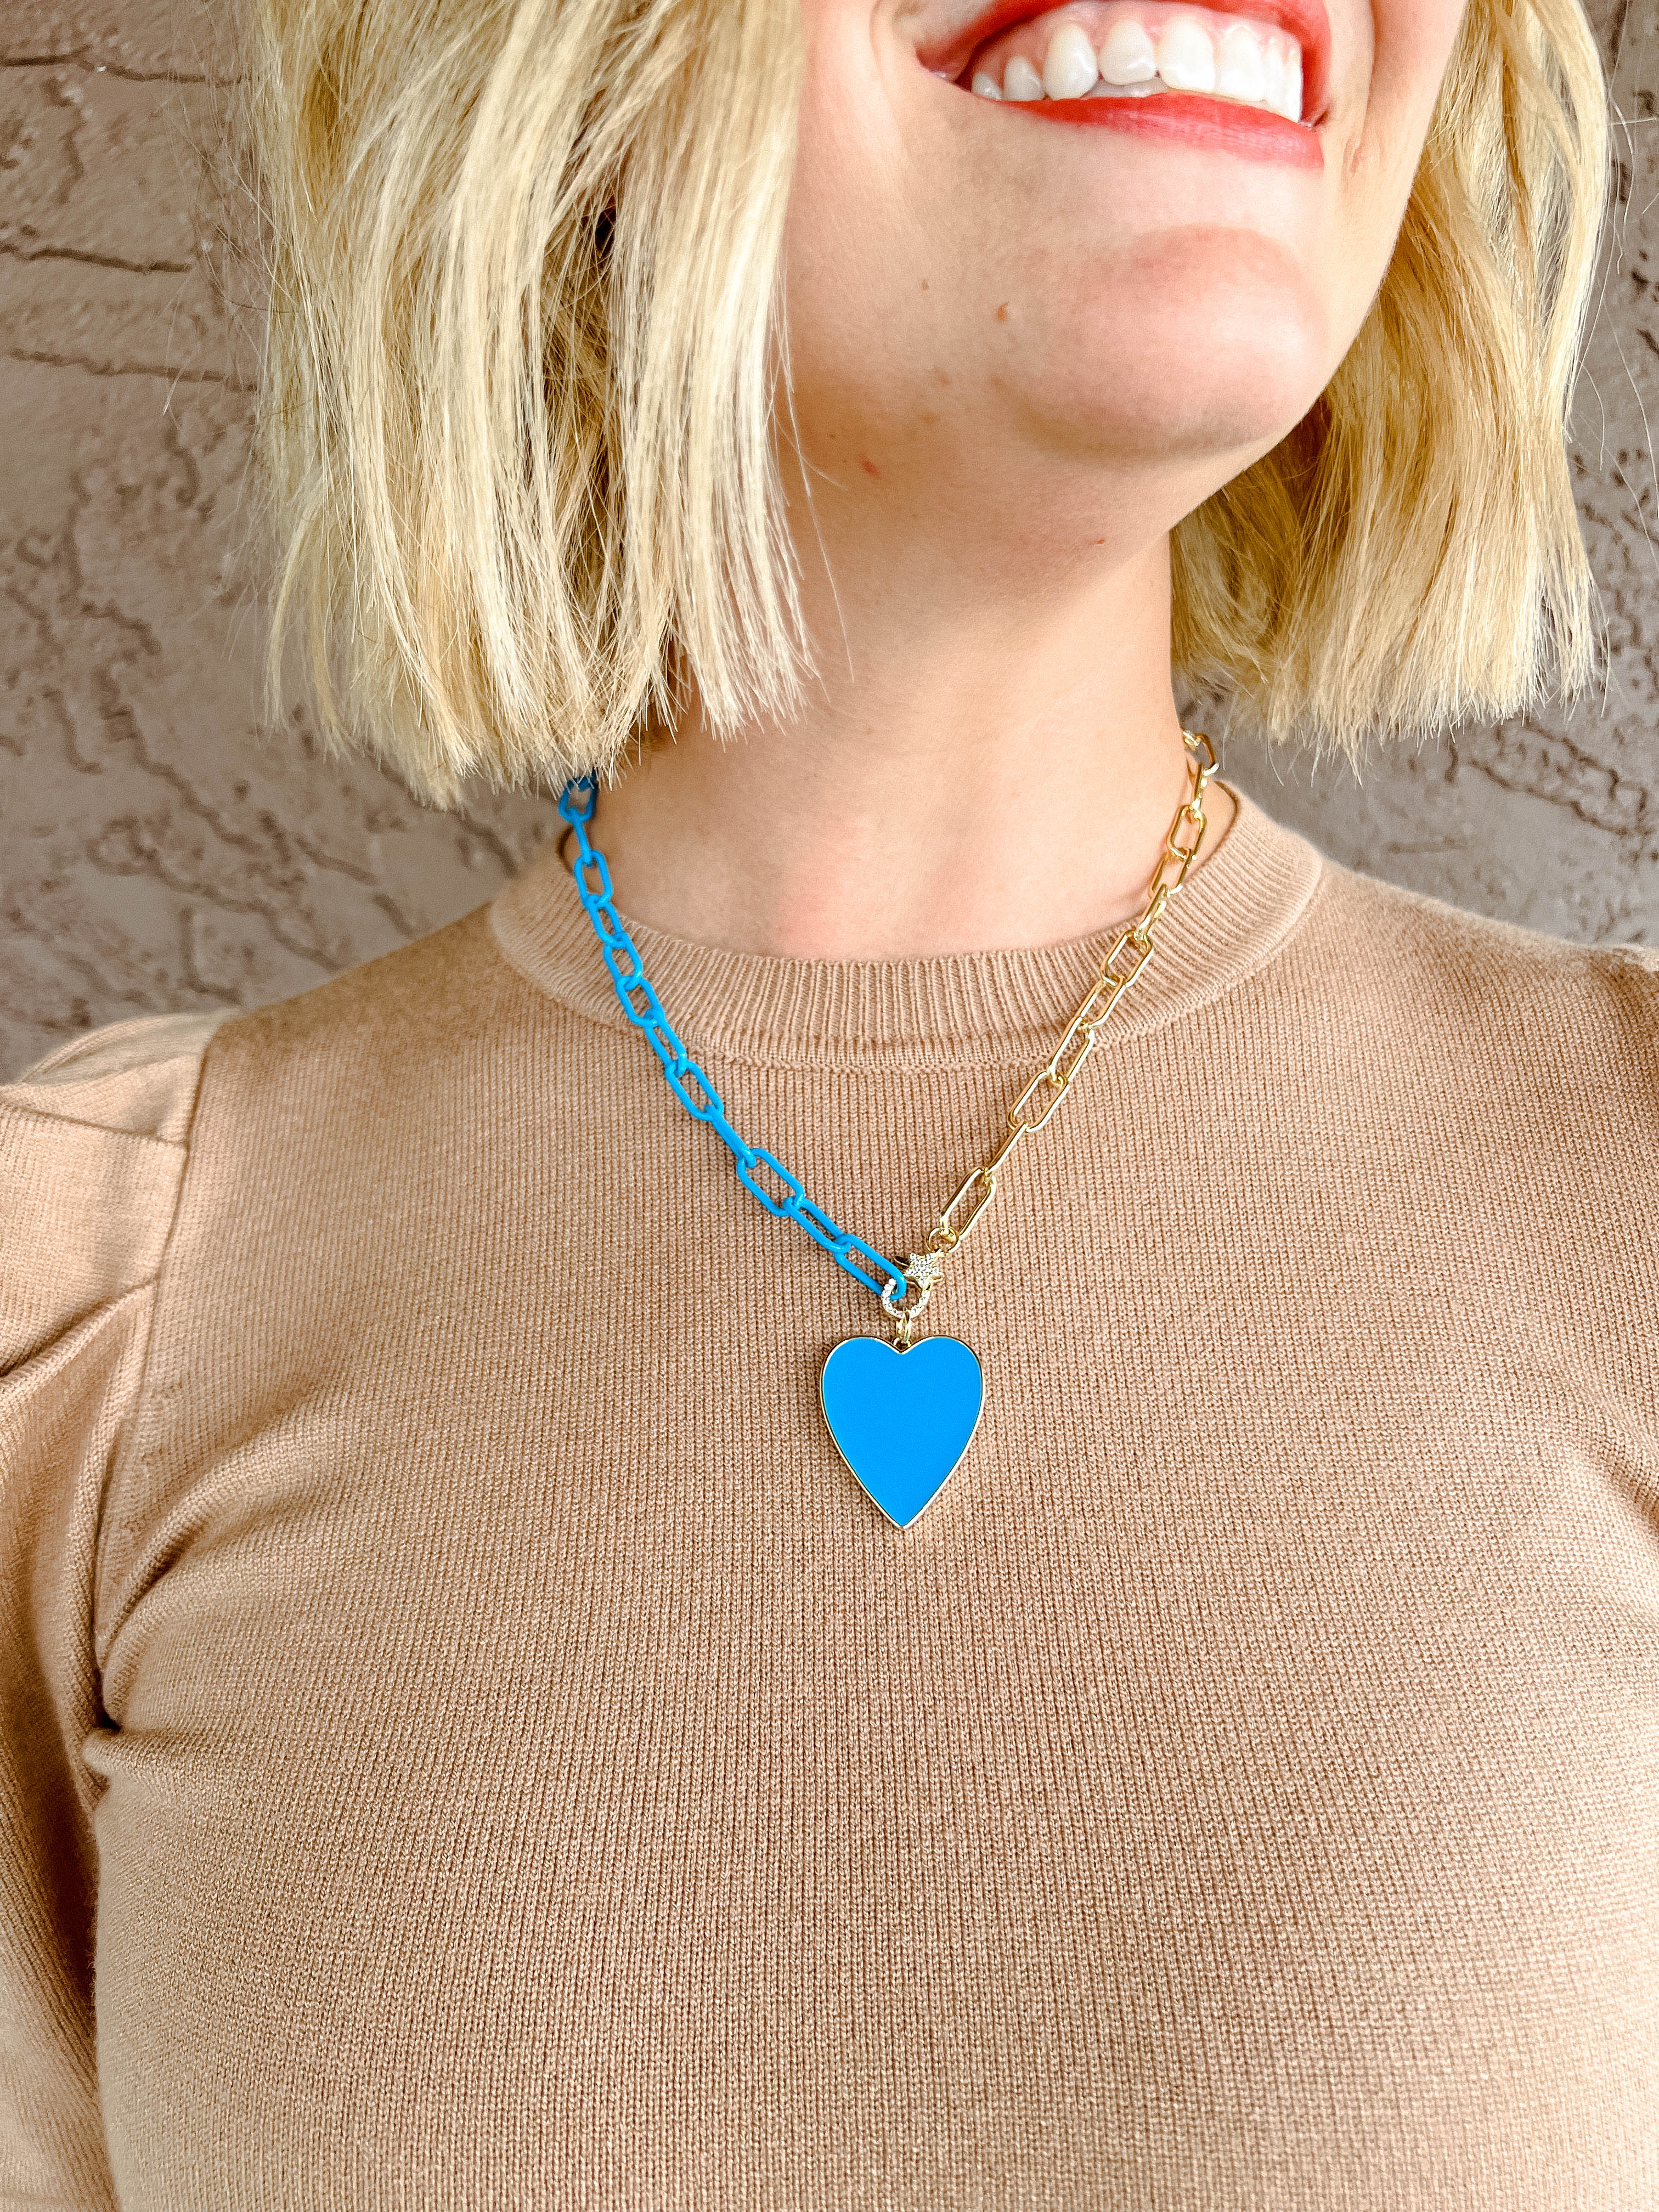 [Treasure Jewels] Shannon Blue Heart Chain Necklace - Turquoise Blue